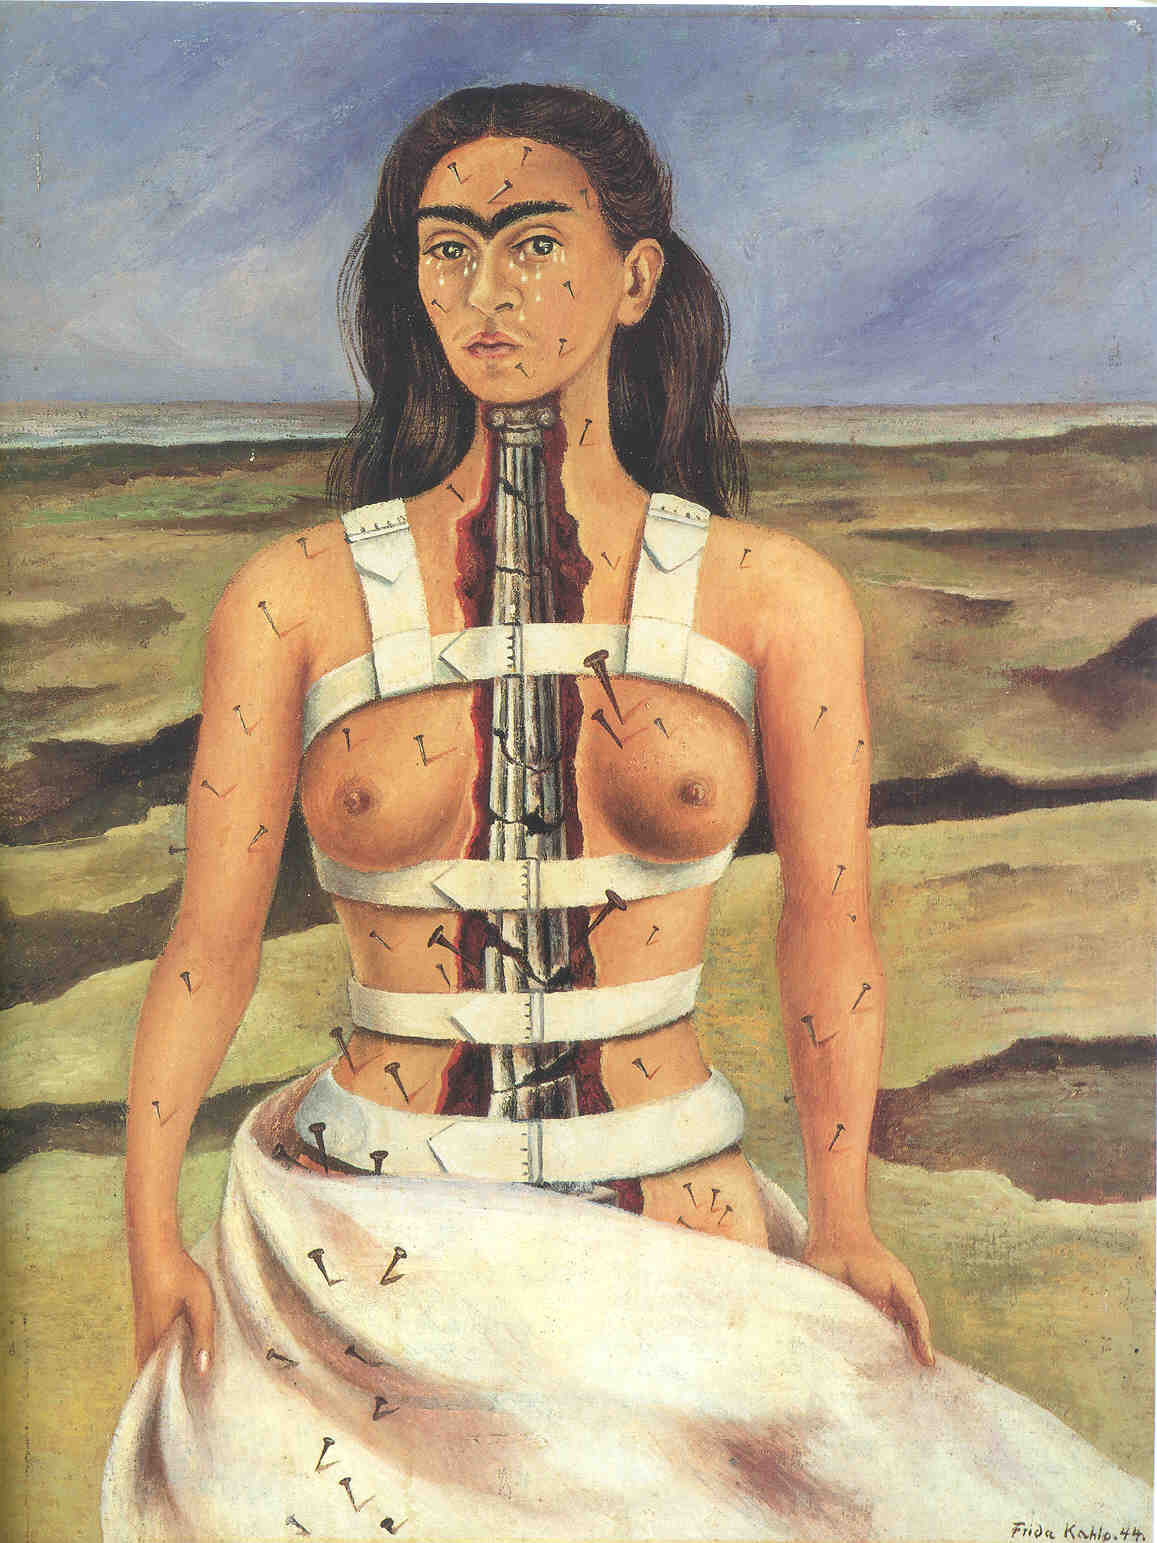 Painting of Kahlo